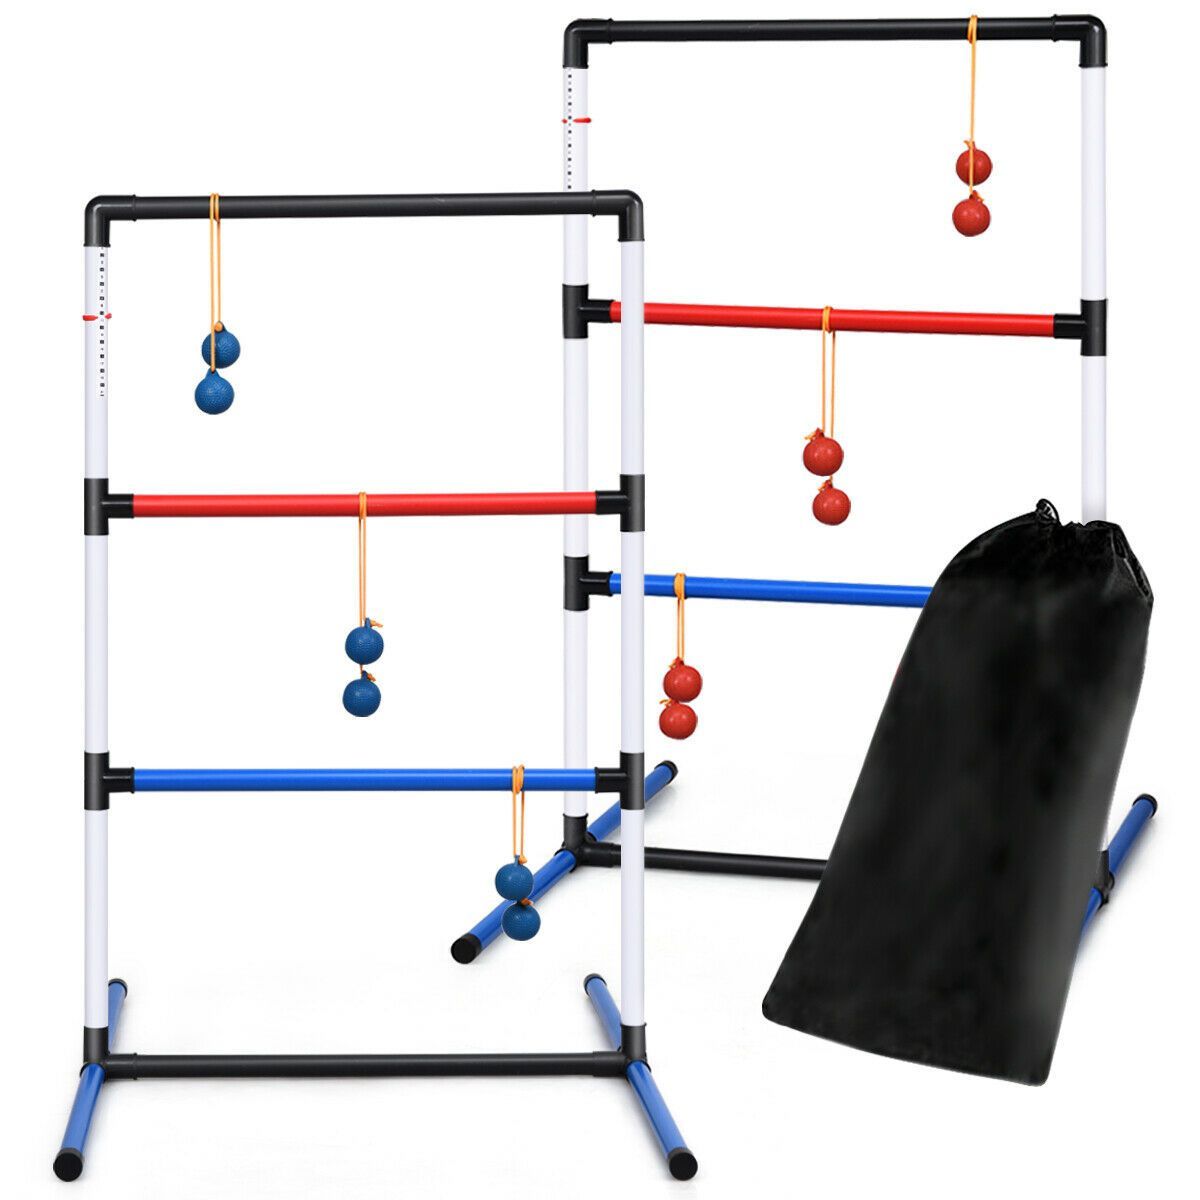 Costway Ladder Ball Toss Game Set Indoor Outdoor W/6 Bolas Score Tracker Carrying Bag | Target